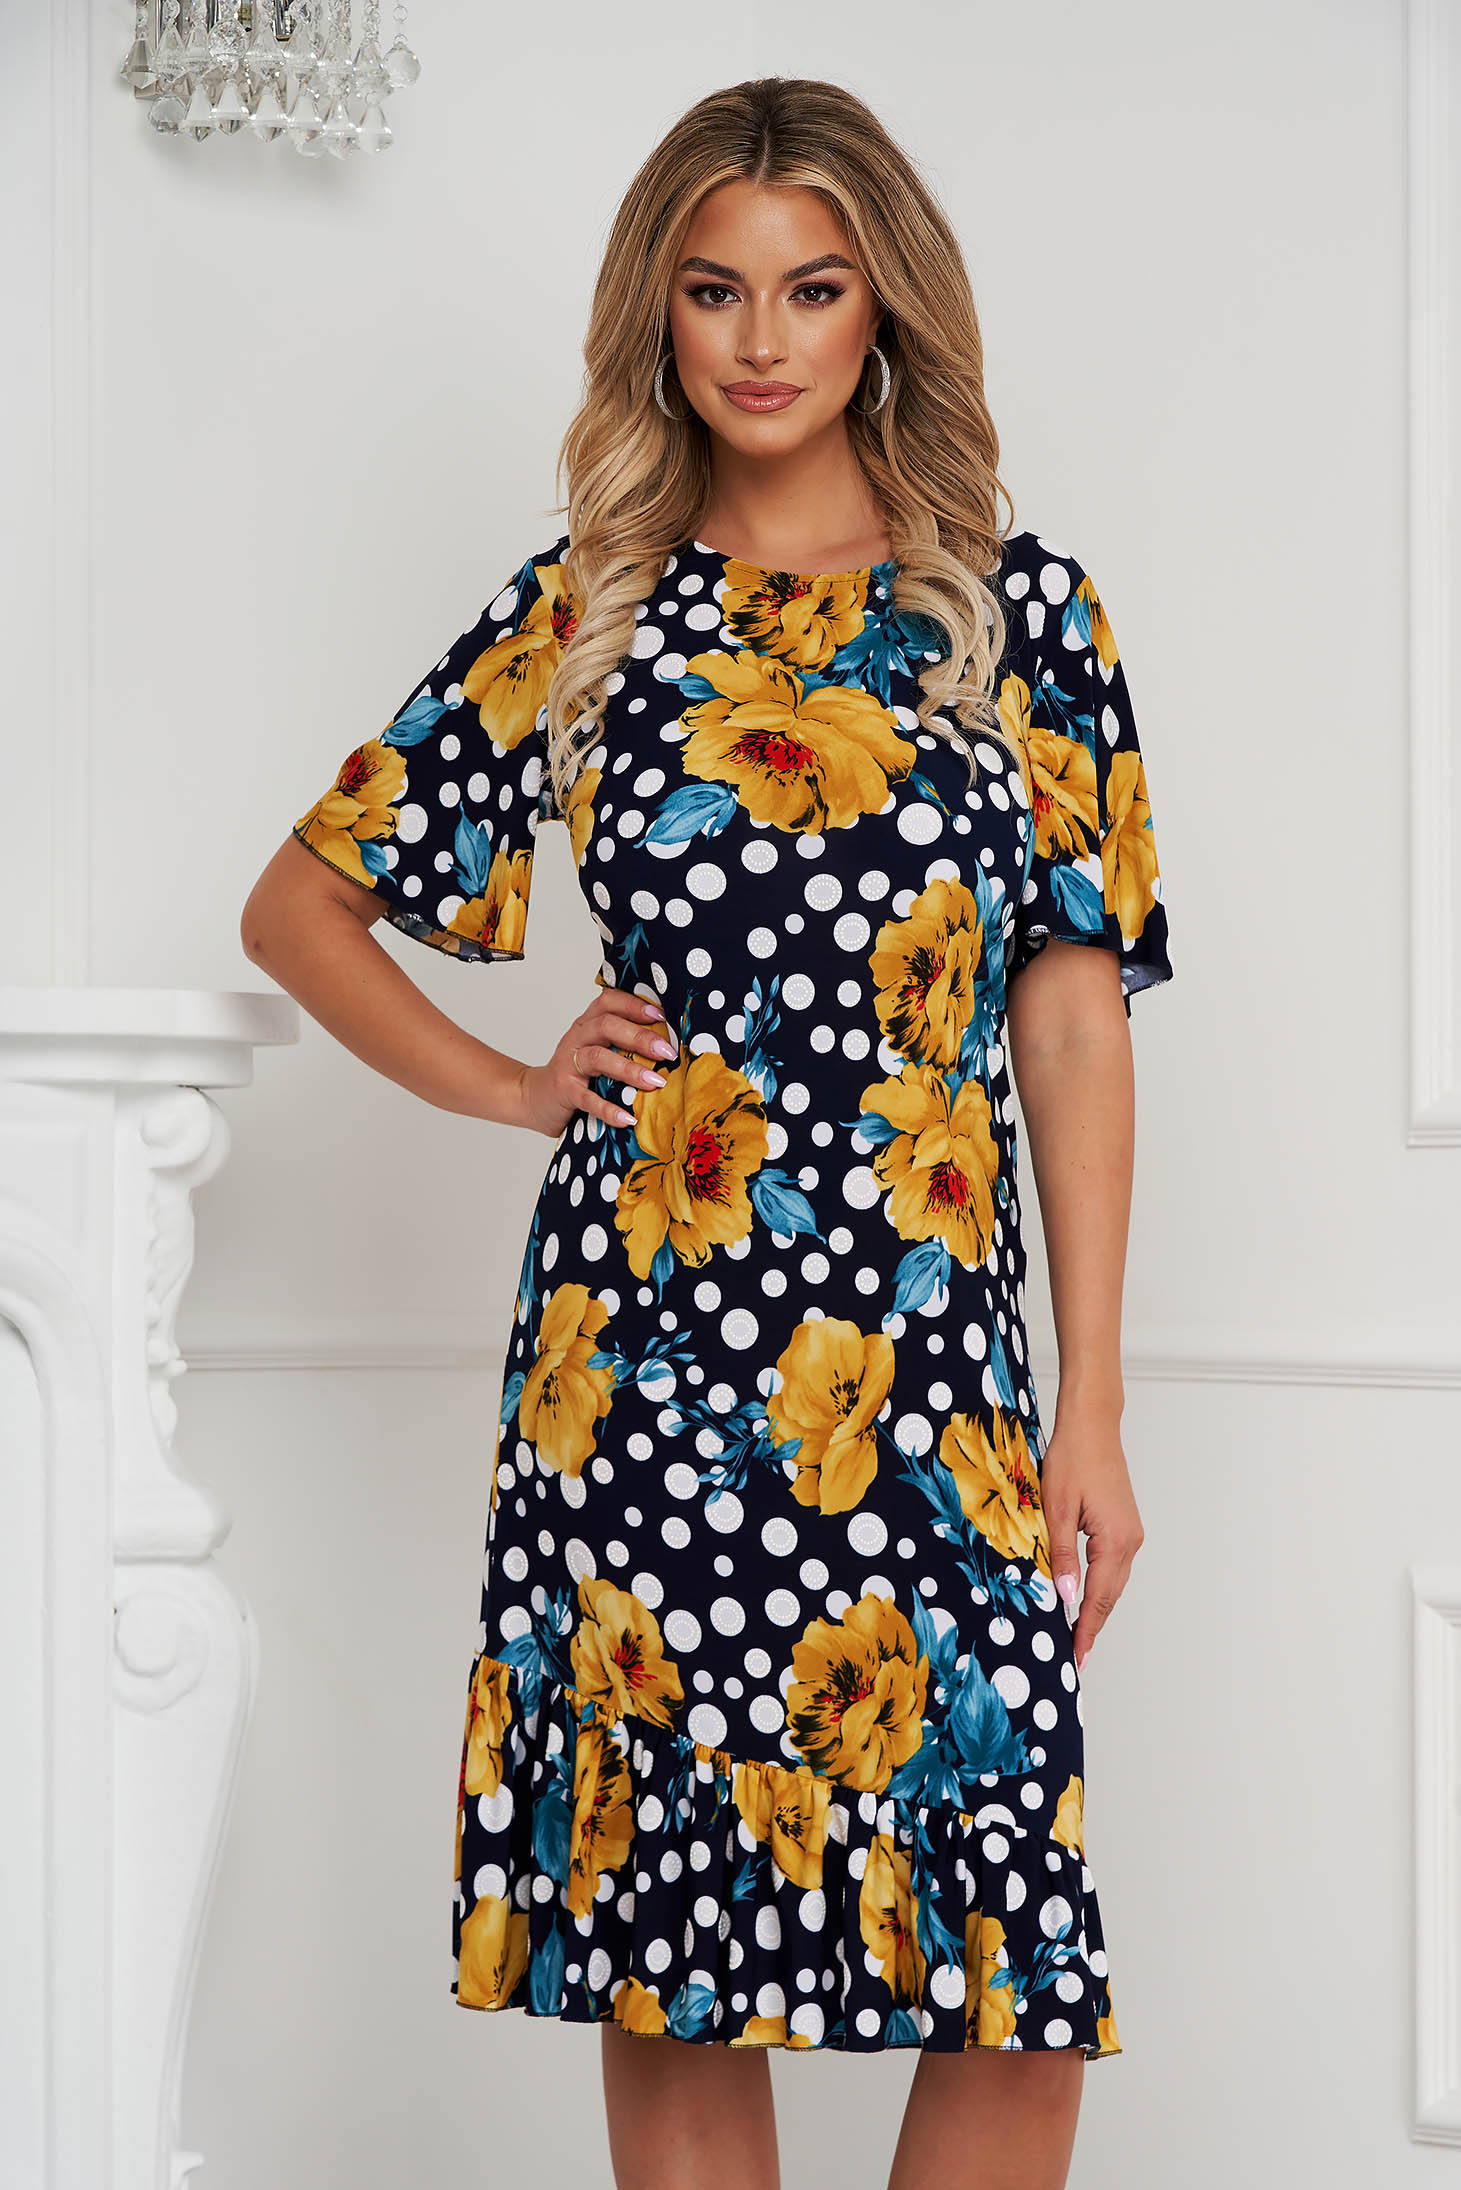 Dress midi straight from elastic fabric with ruffle details with floral print